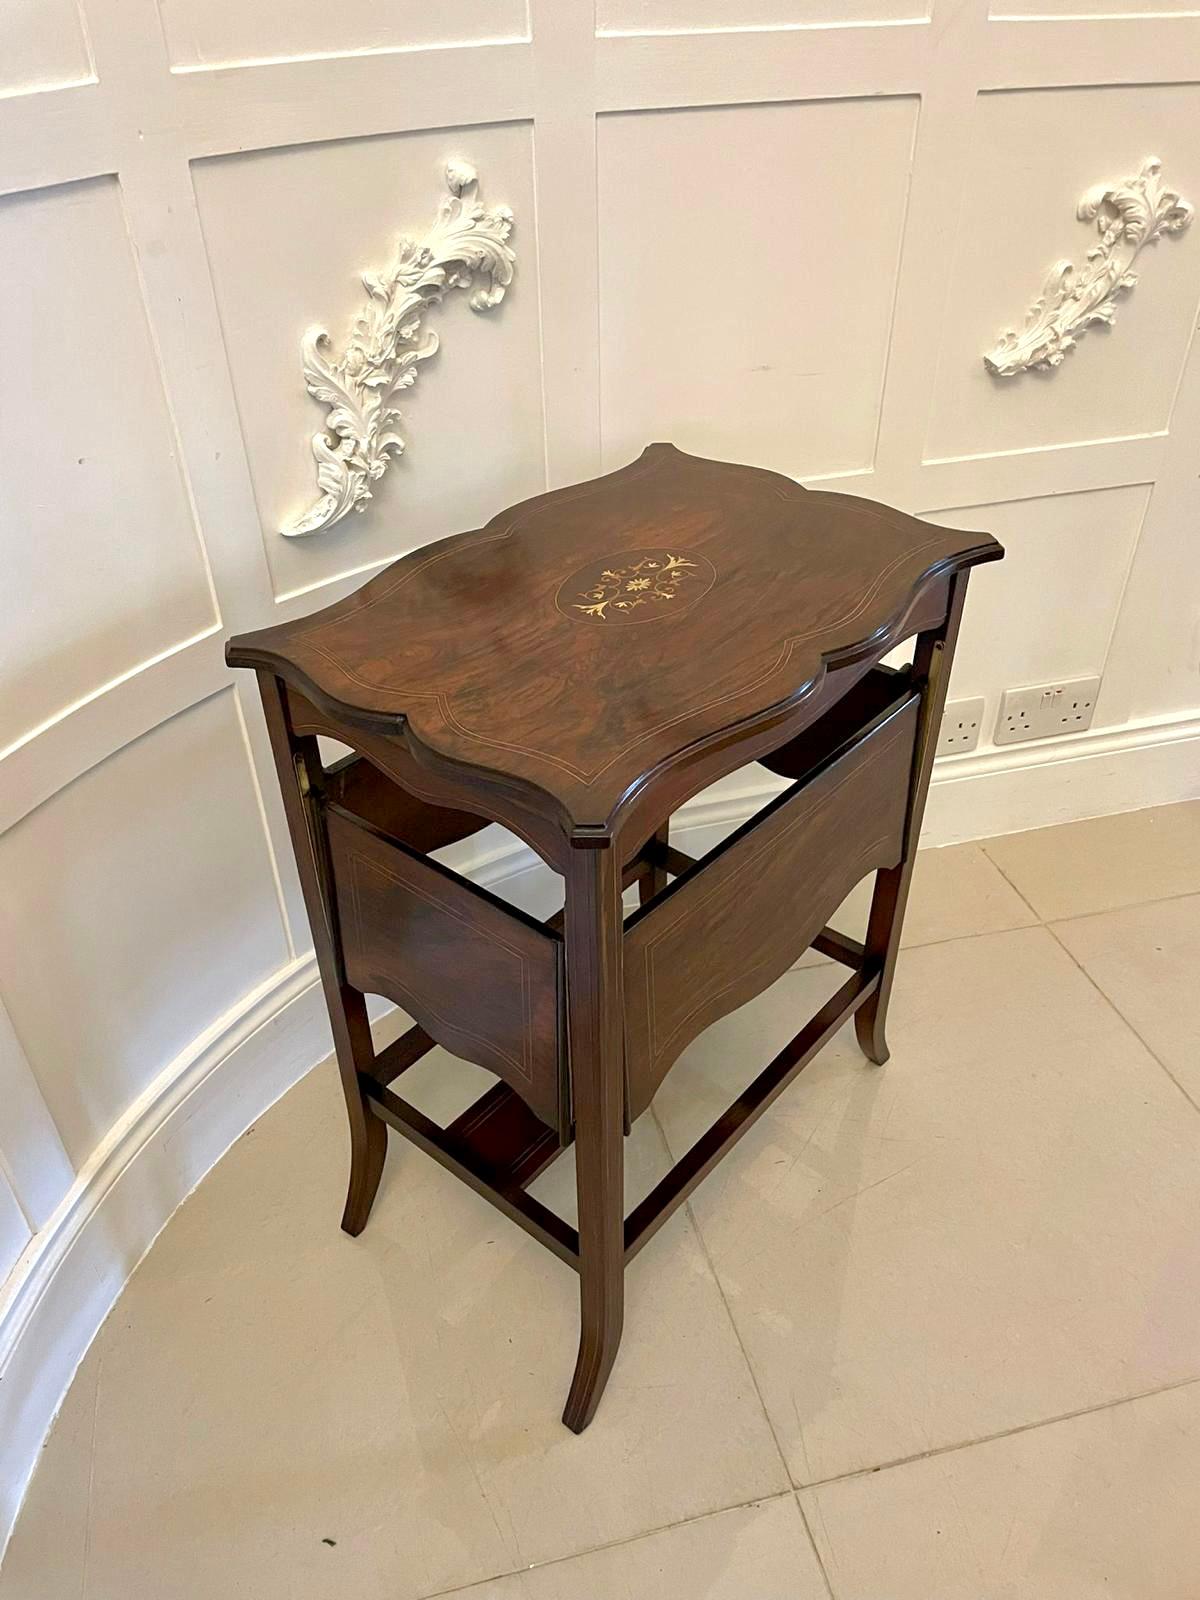 Unusual antique Edwardian inlaid rosewood centre/side table having a pretty inlaid and shaped rosewood top and four unusual inlaid rosewood shaped drop leaves. It stands on four elegant shaped inlaid rosewood legs and united by square